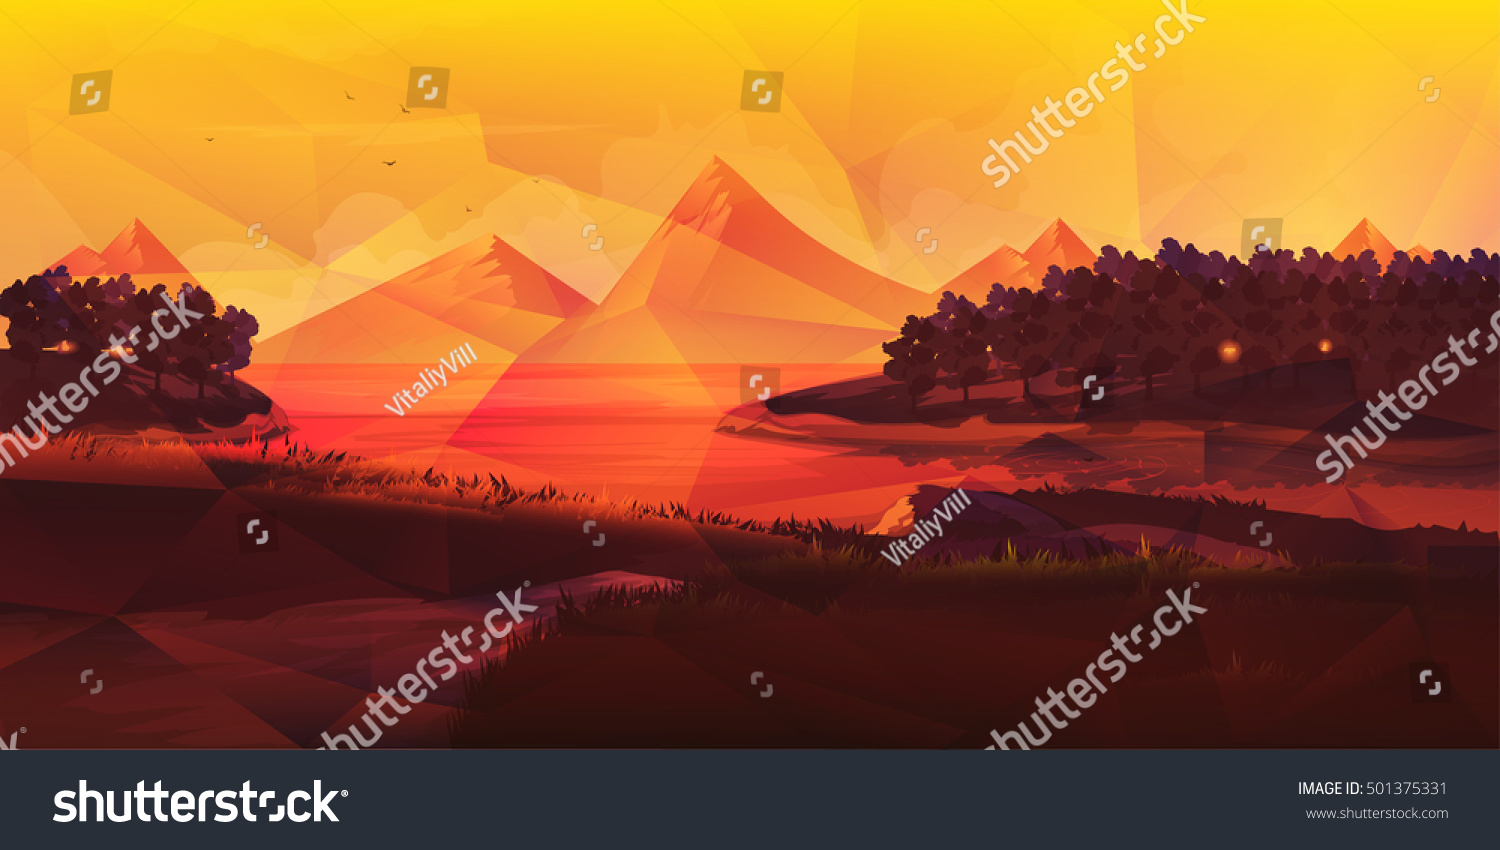 Royalty Free Stock Illustration Of Low Poly Mountain Landscapegreat